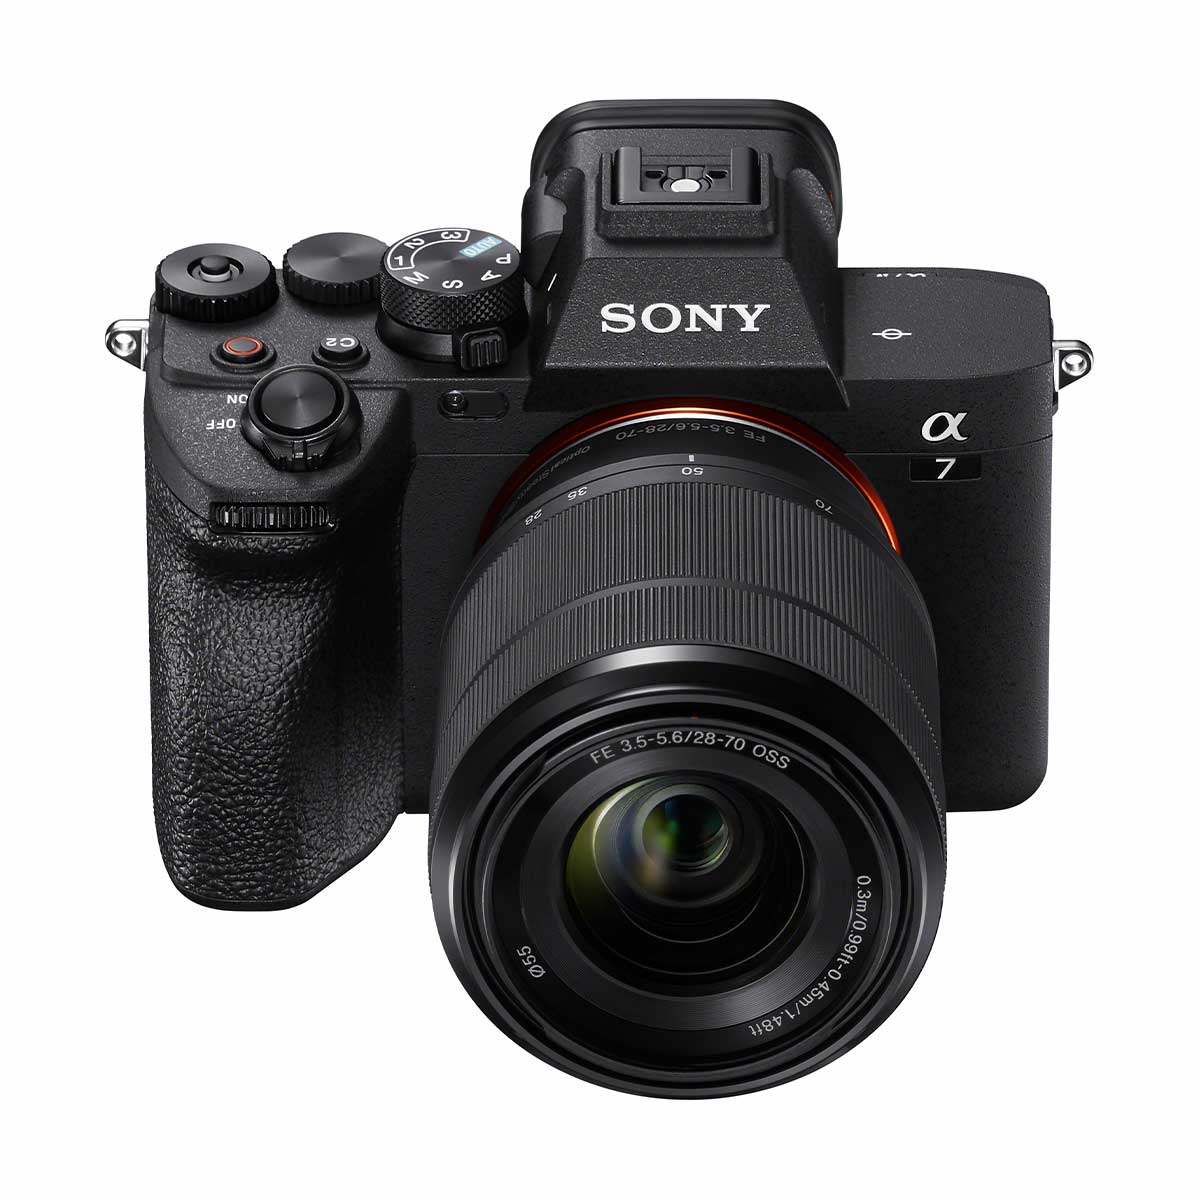 Sony FE mm F3..6 OSS: Serious contender to the Zeiss